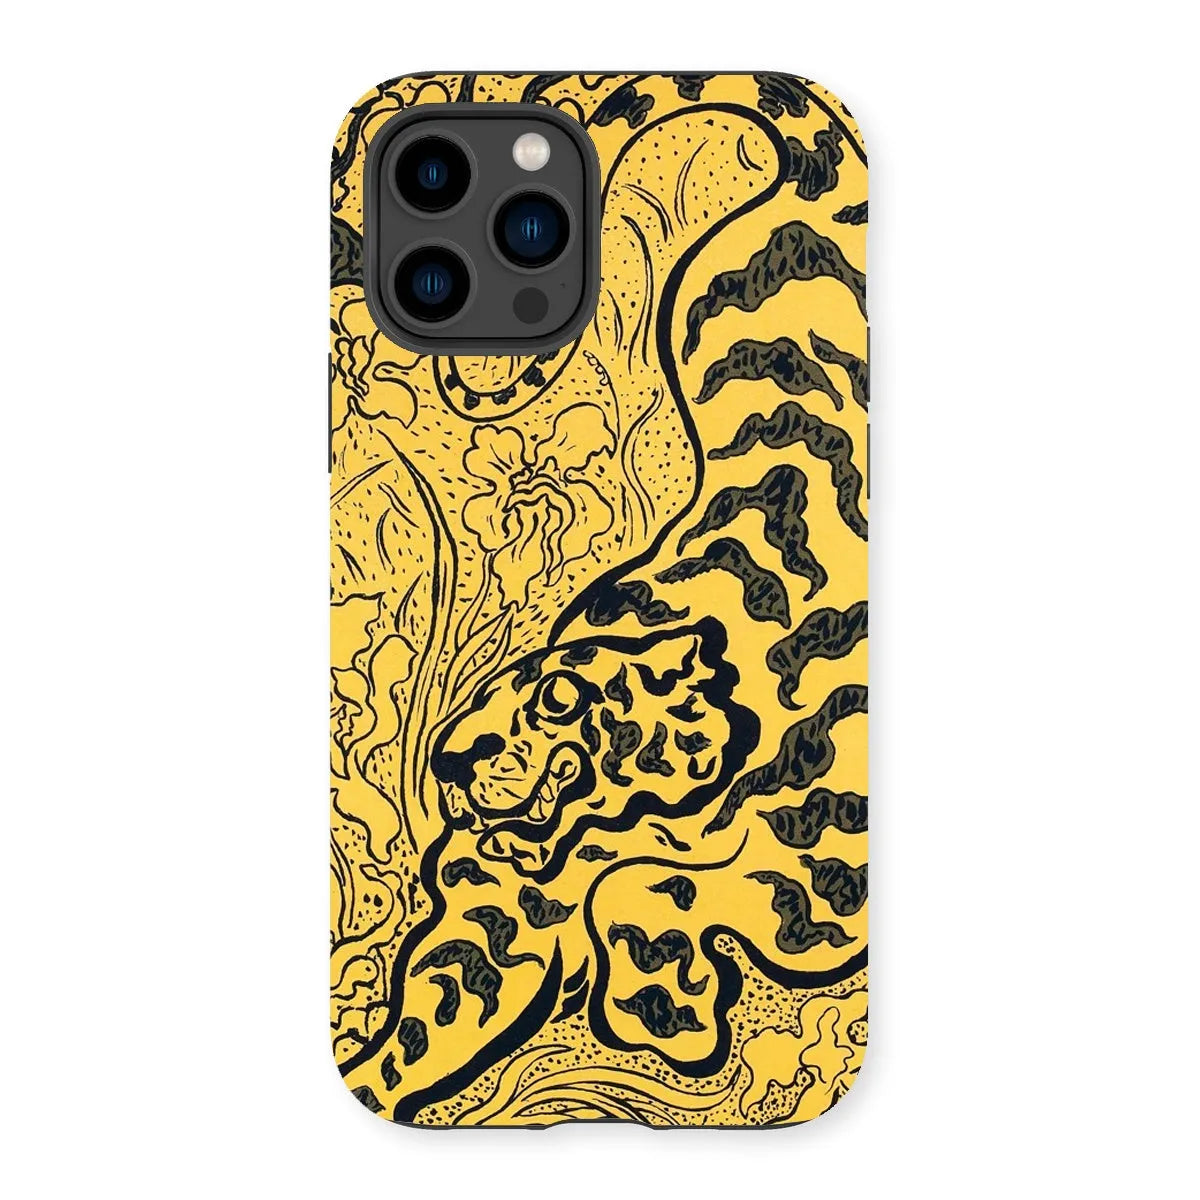 Tiger In The Jungle - Graphic Art Phone Case - Paul Ranson - Iphone 14 Pro / Matte - Mobile Phone Cases - Aesthetic Art